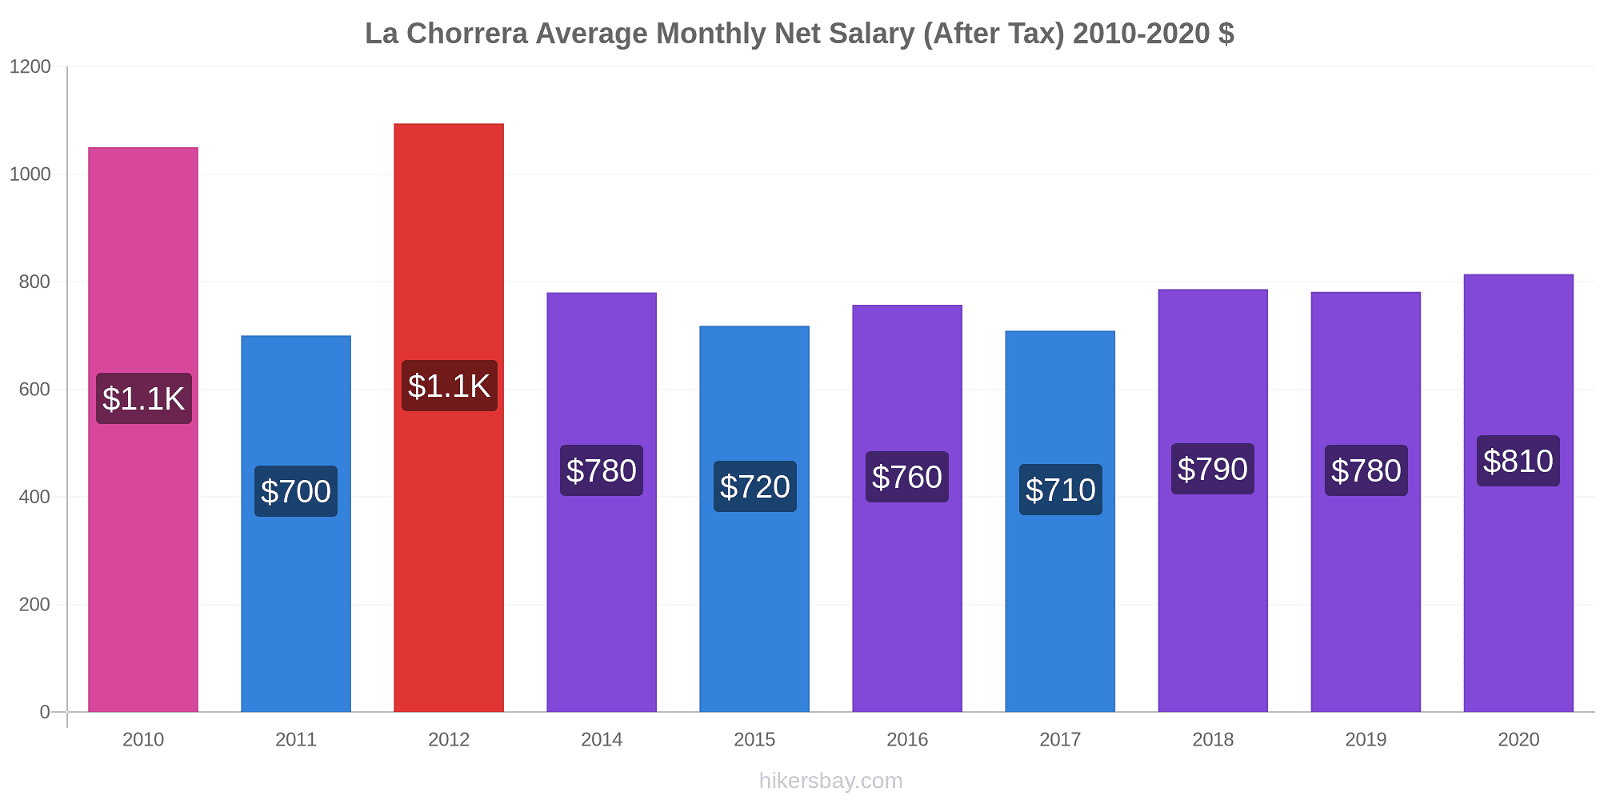 La Chorrera price changes Average Monthly Net Salary (After Tax) hikersbay.com